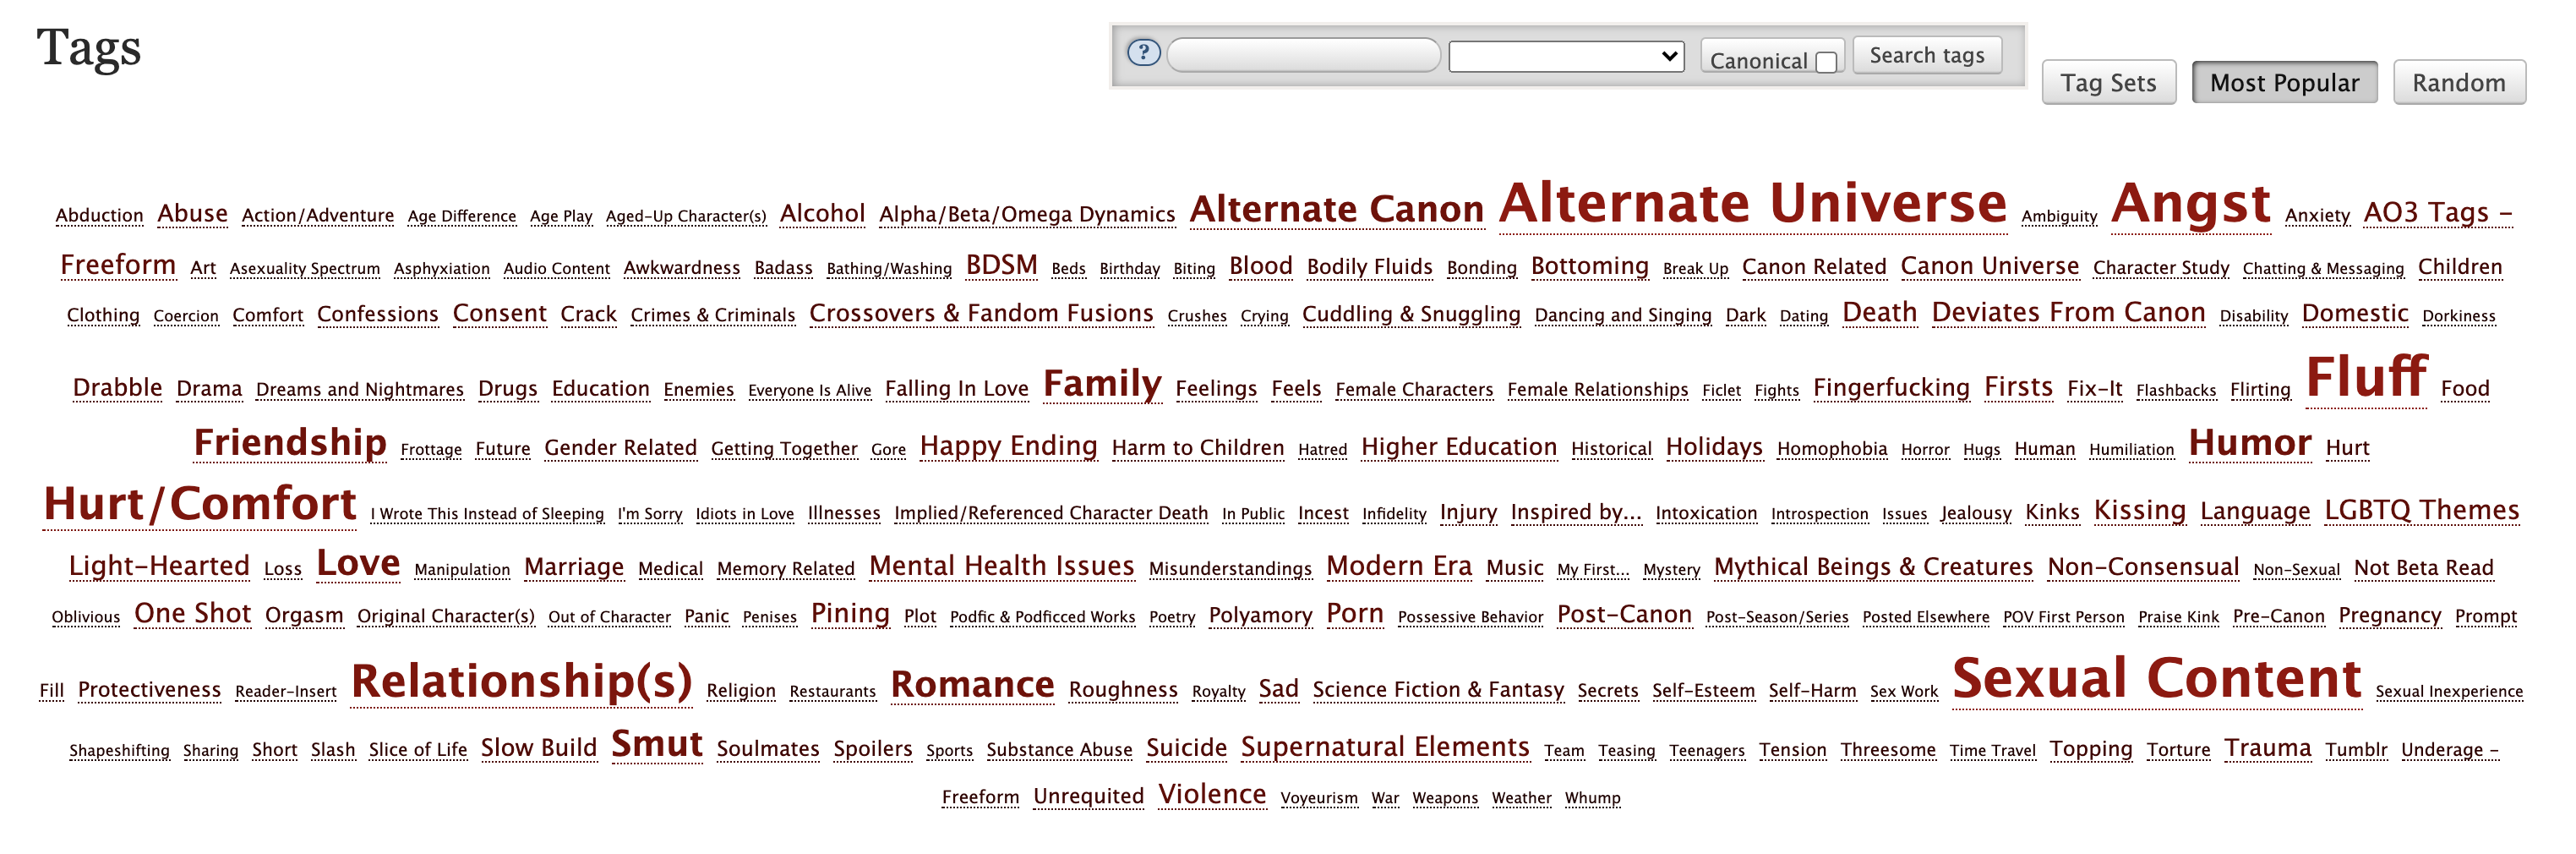 Archive of Our Own Tags. The words angst and sexual content are larger than some of the other tags.